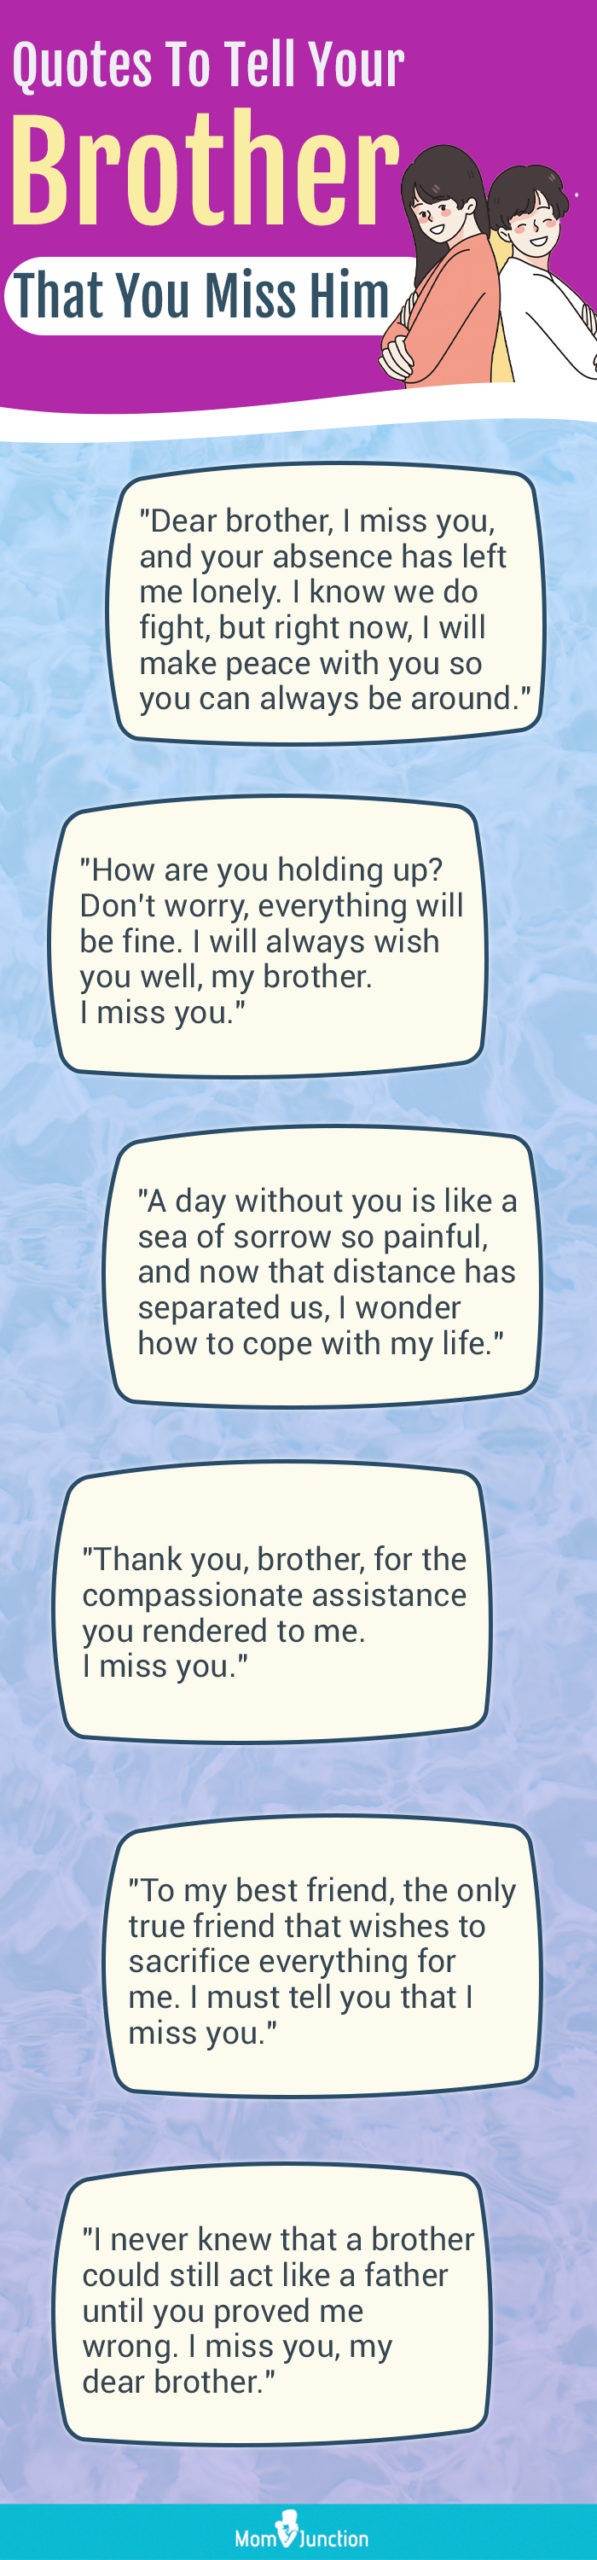 i miss you brother quotes (infographic)